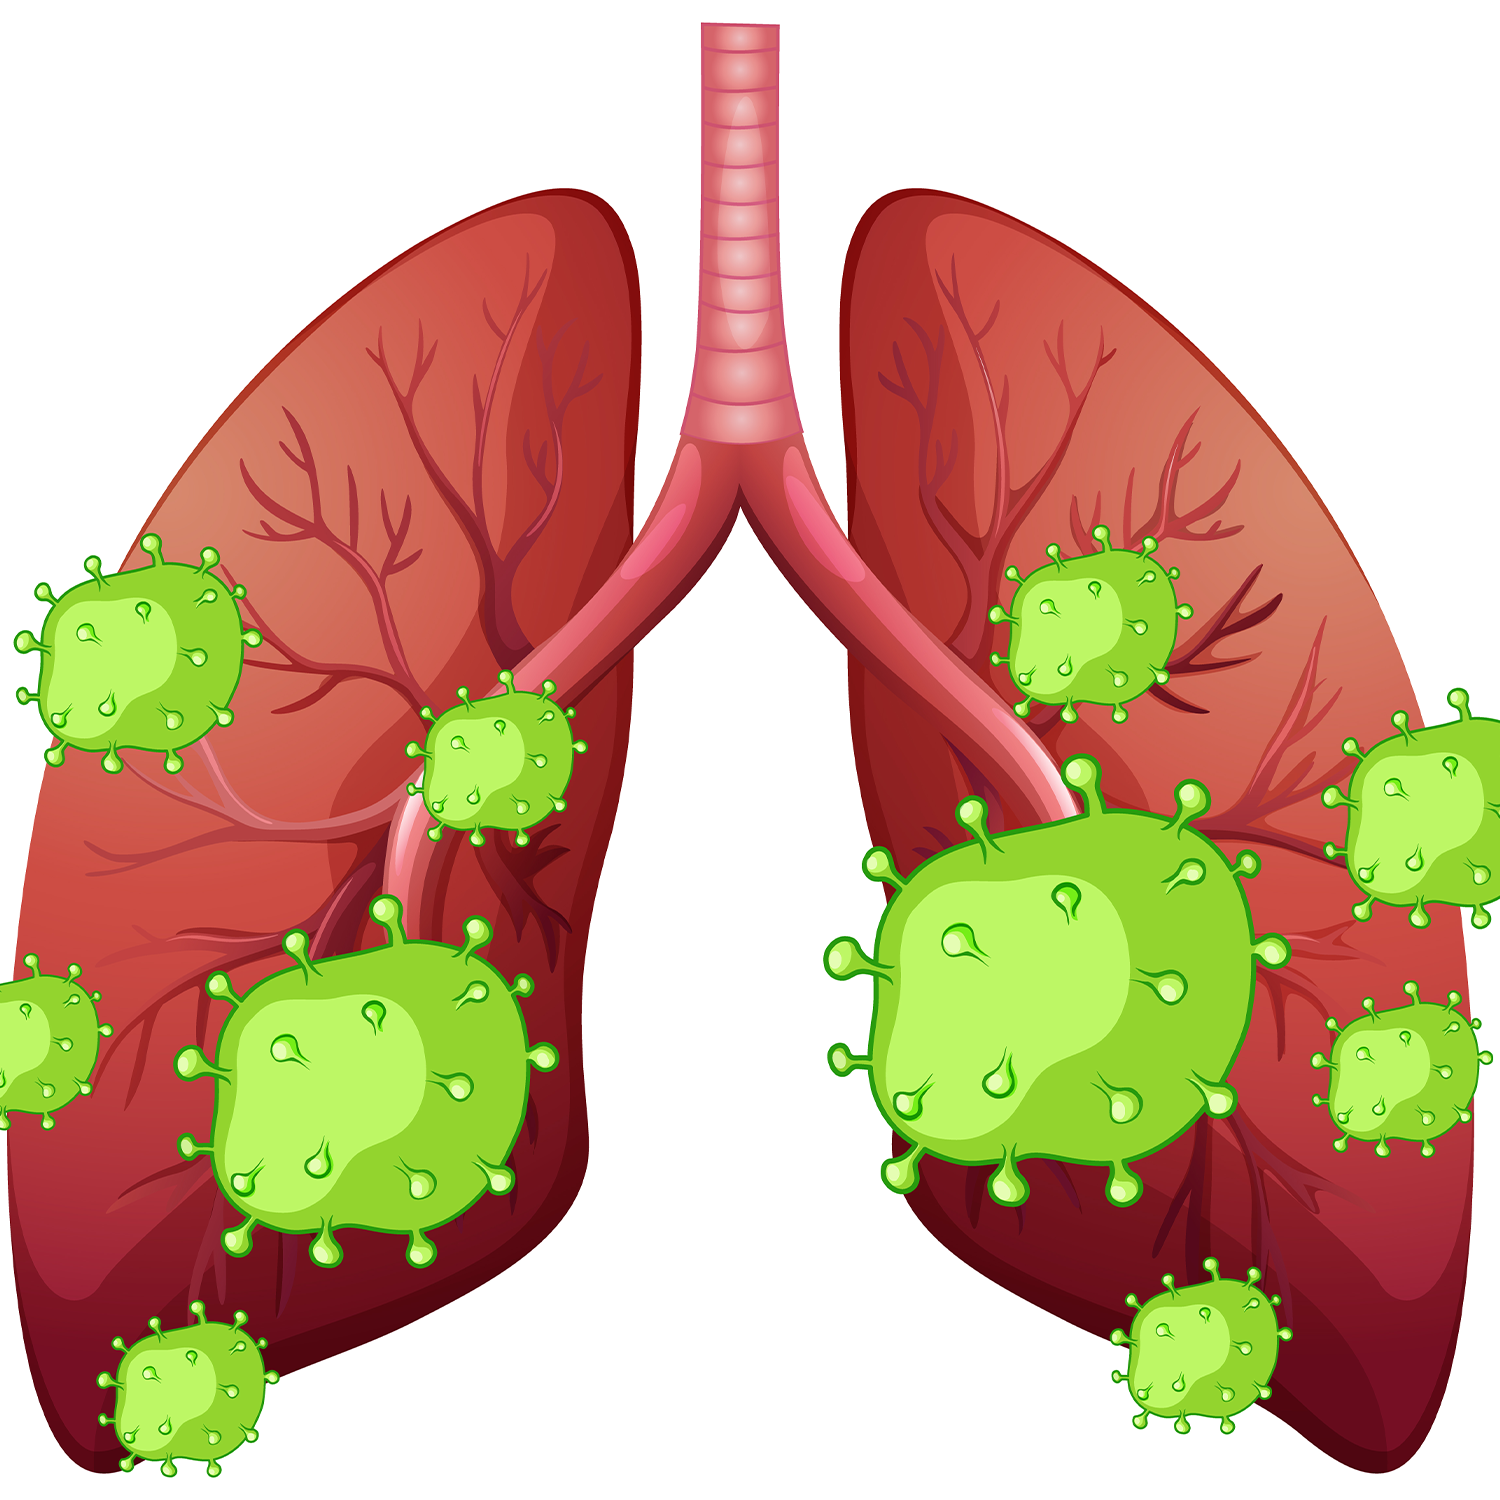 5 Powerful Home Remedies To Get Rid Of Lung Infection